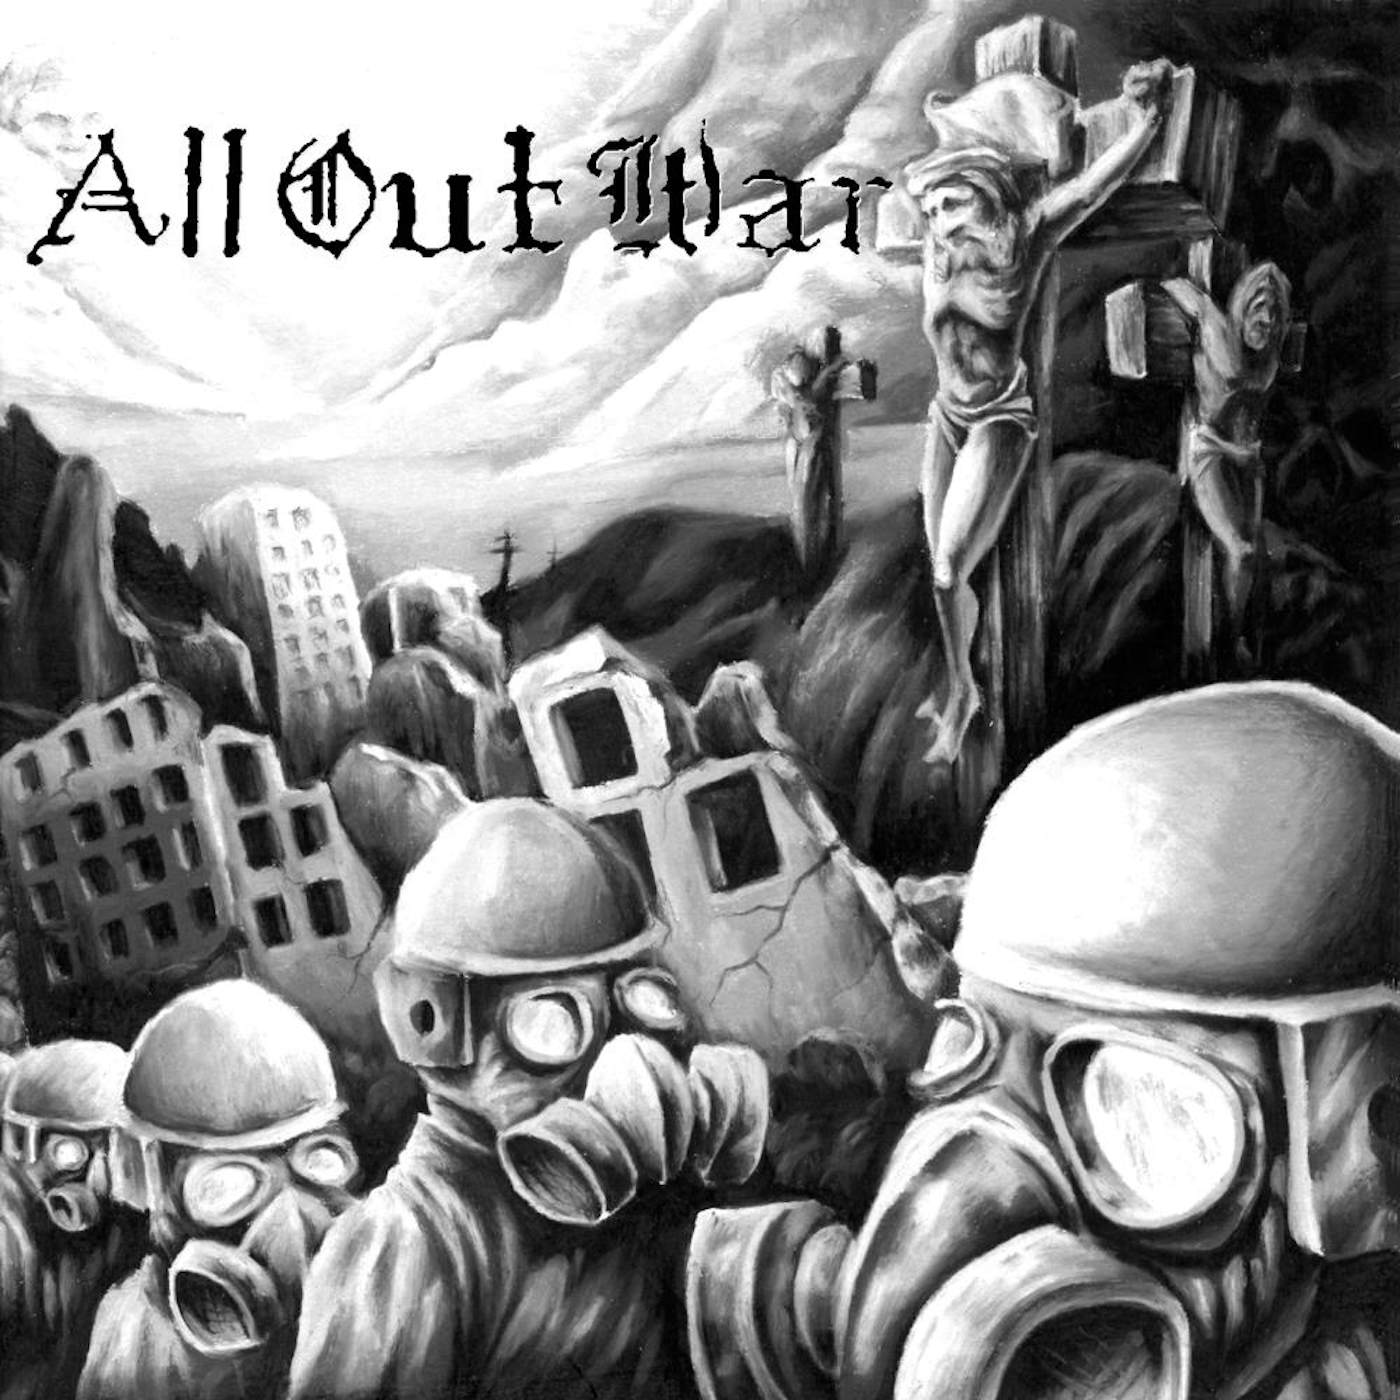 All Out War FOR THOSE WHO WERE CRUCIFIED Vinyl Record